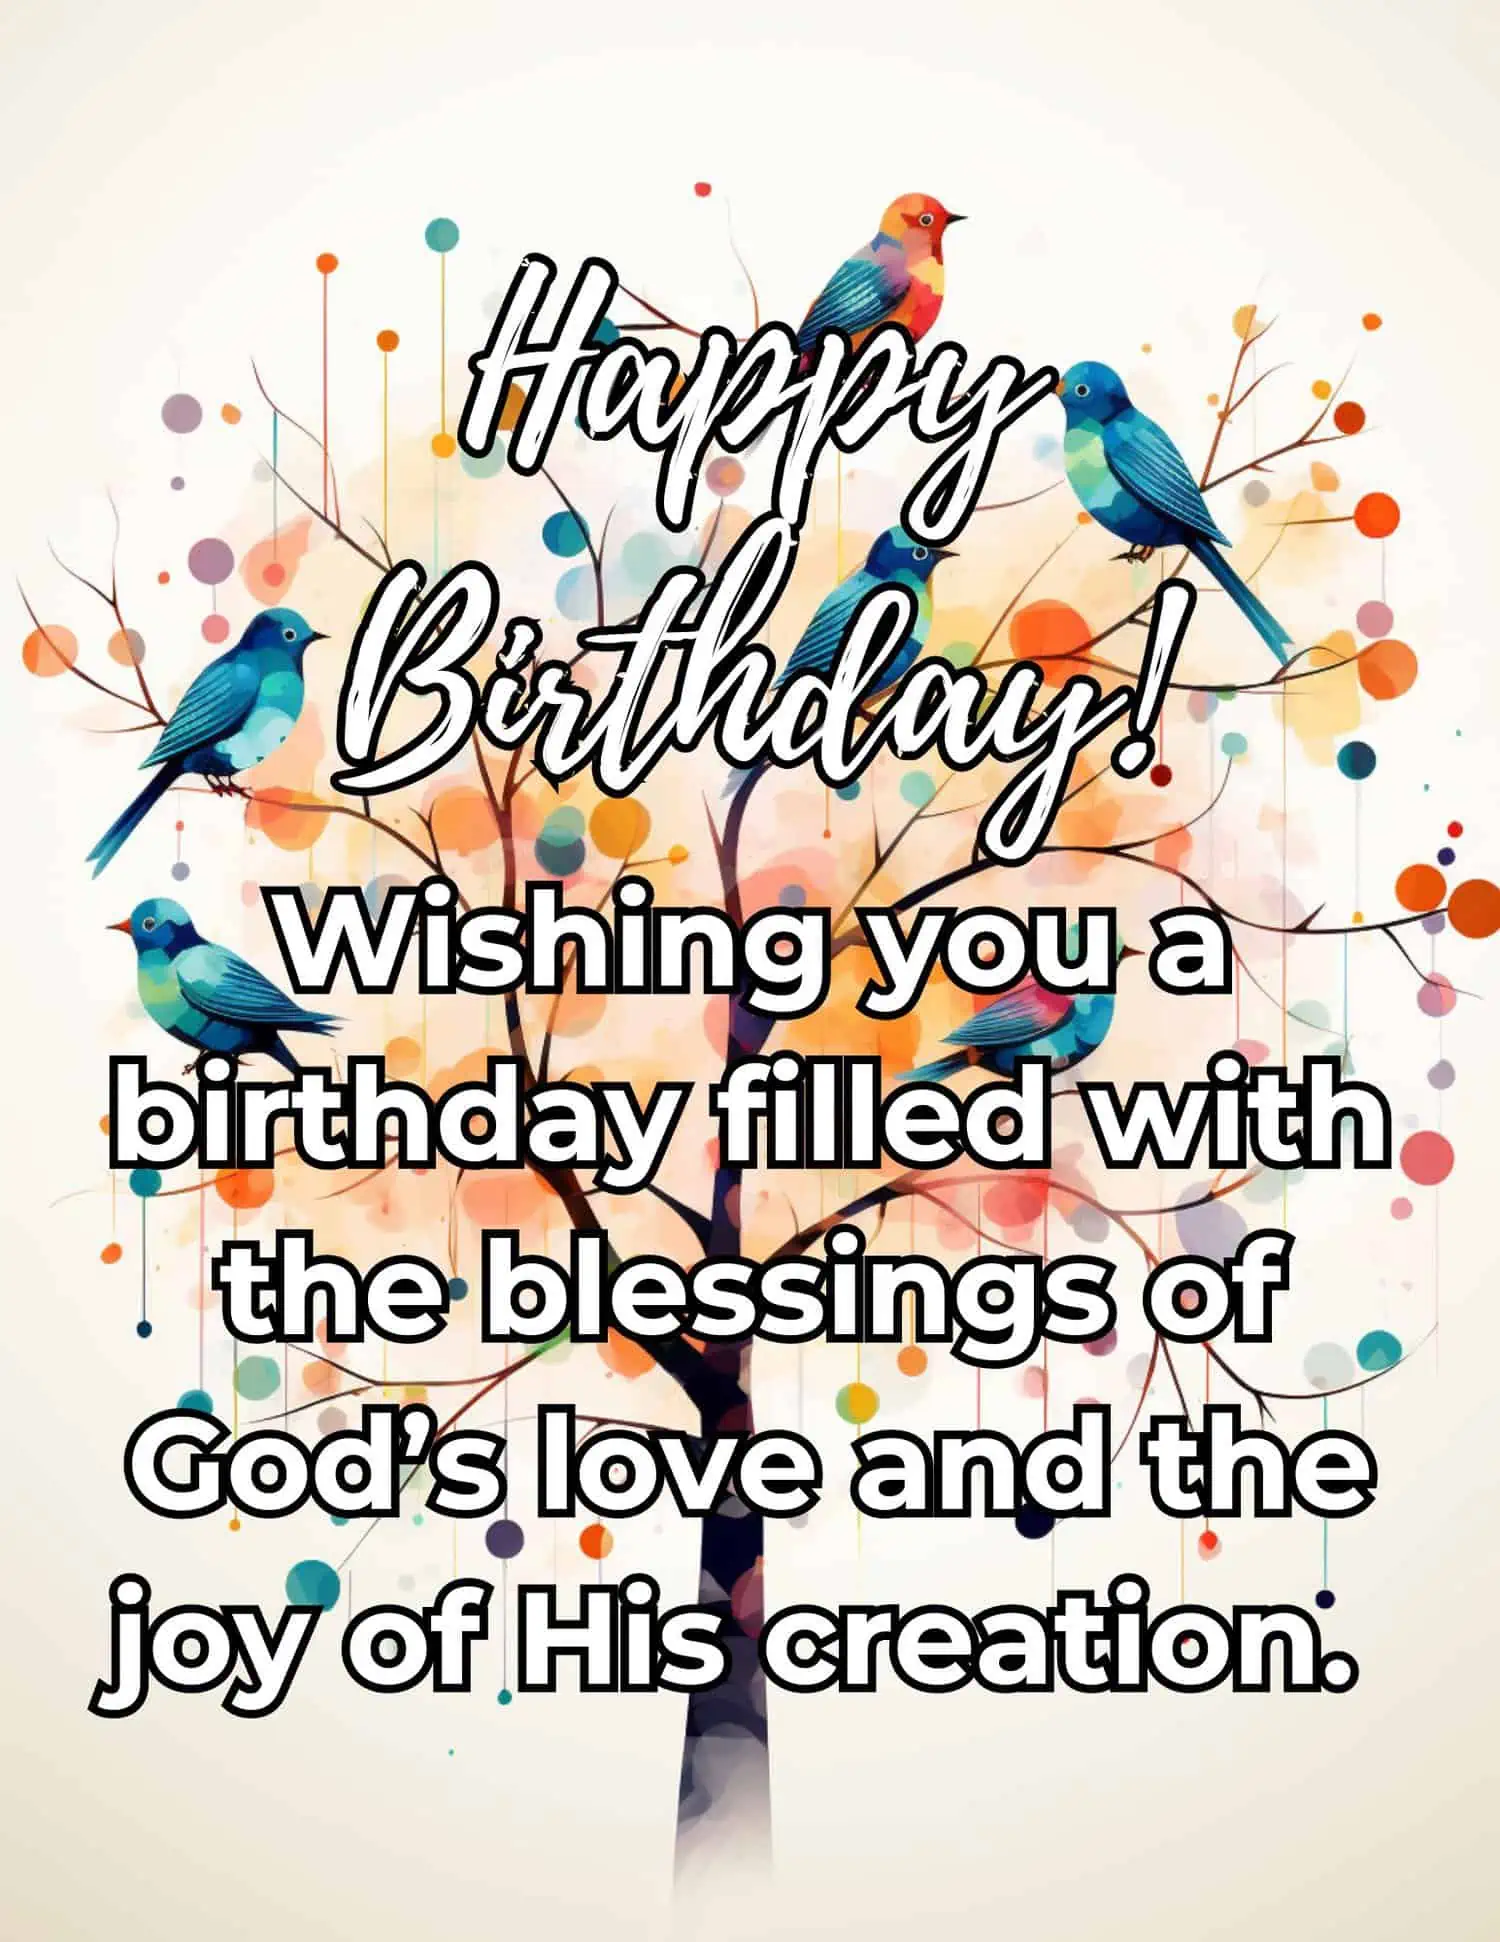 Spiritually meaningful and heartfelt birthday greetings, infused with faith and affection, perfect for your brother-in-law.